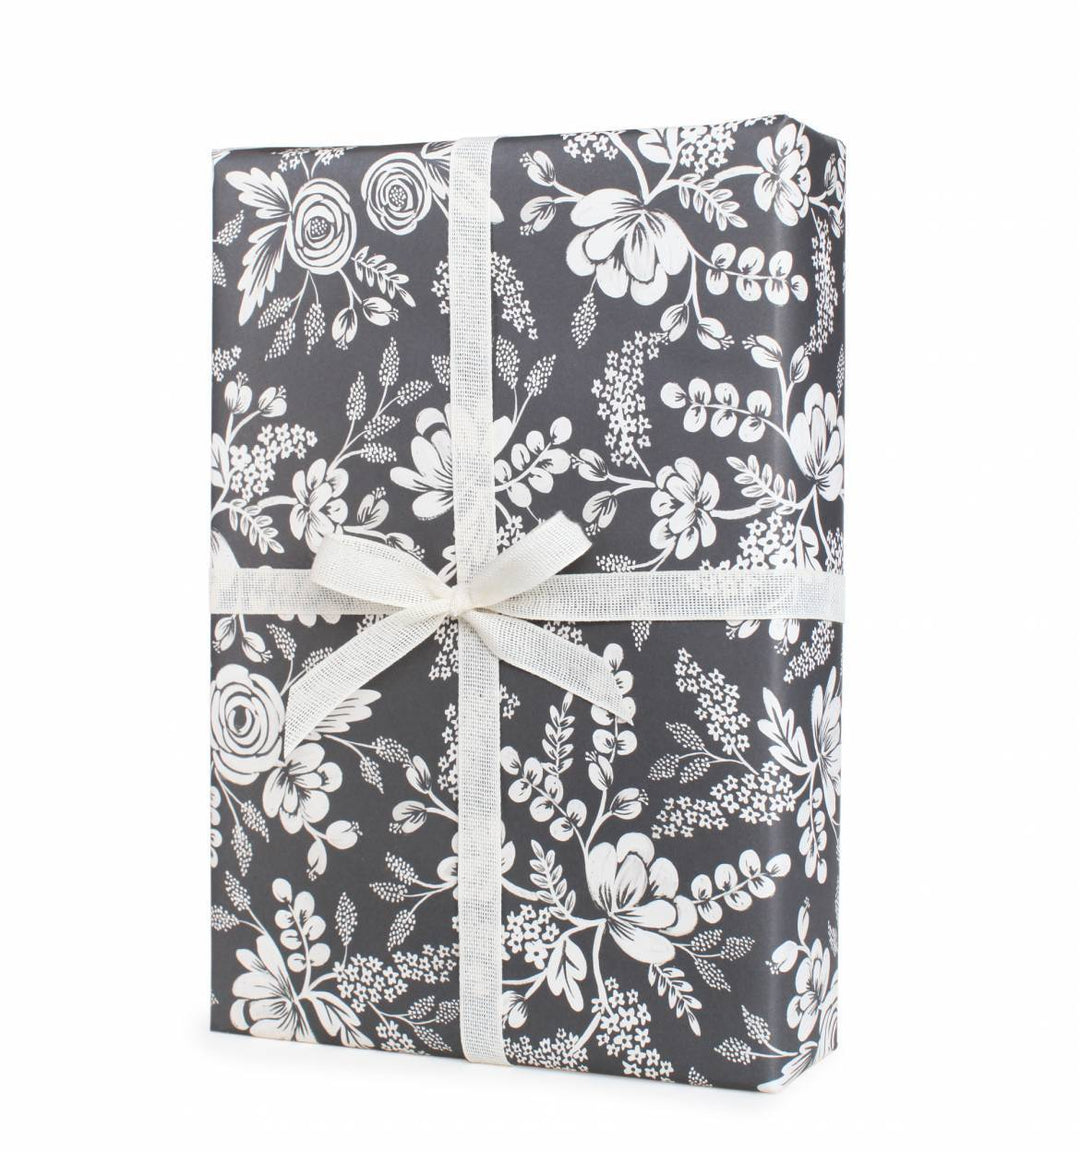 Graphite Lace Wrapping Sheets